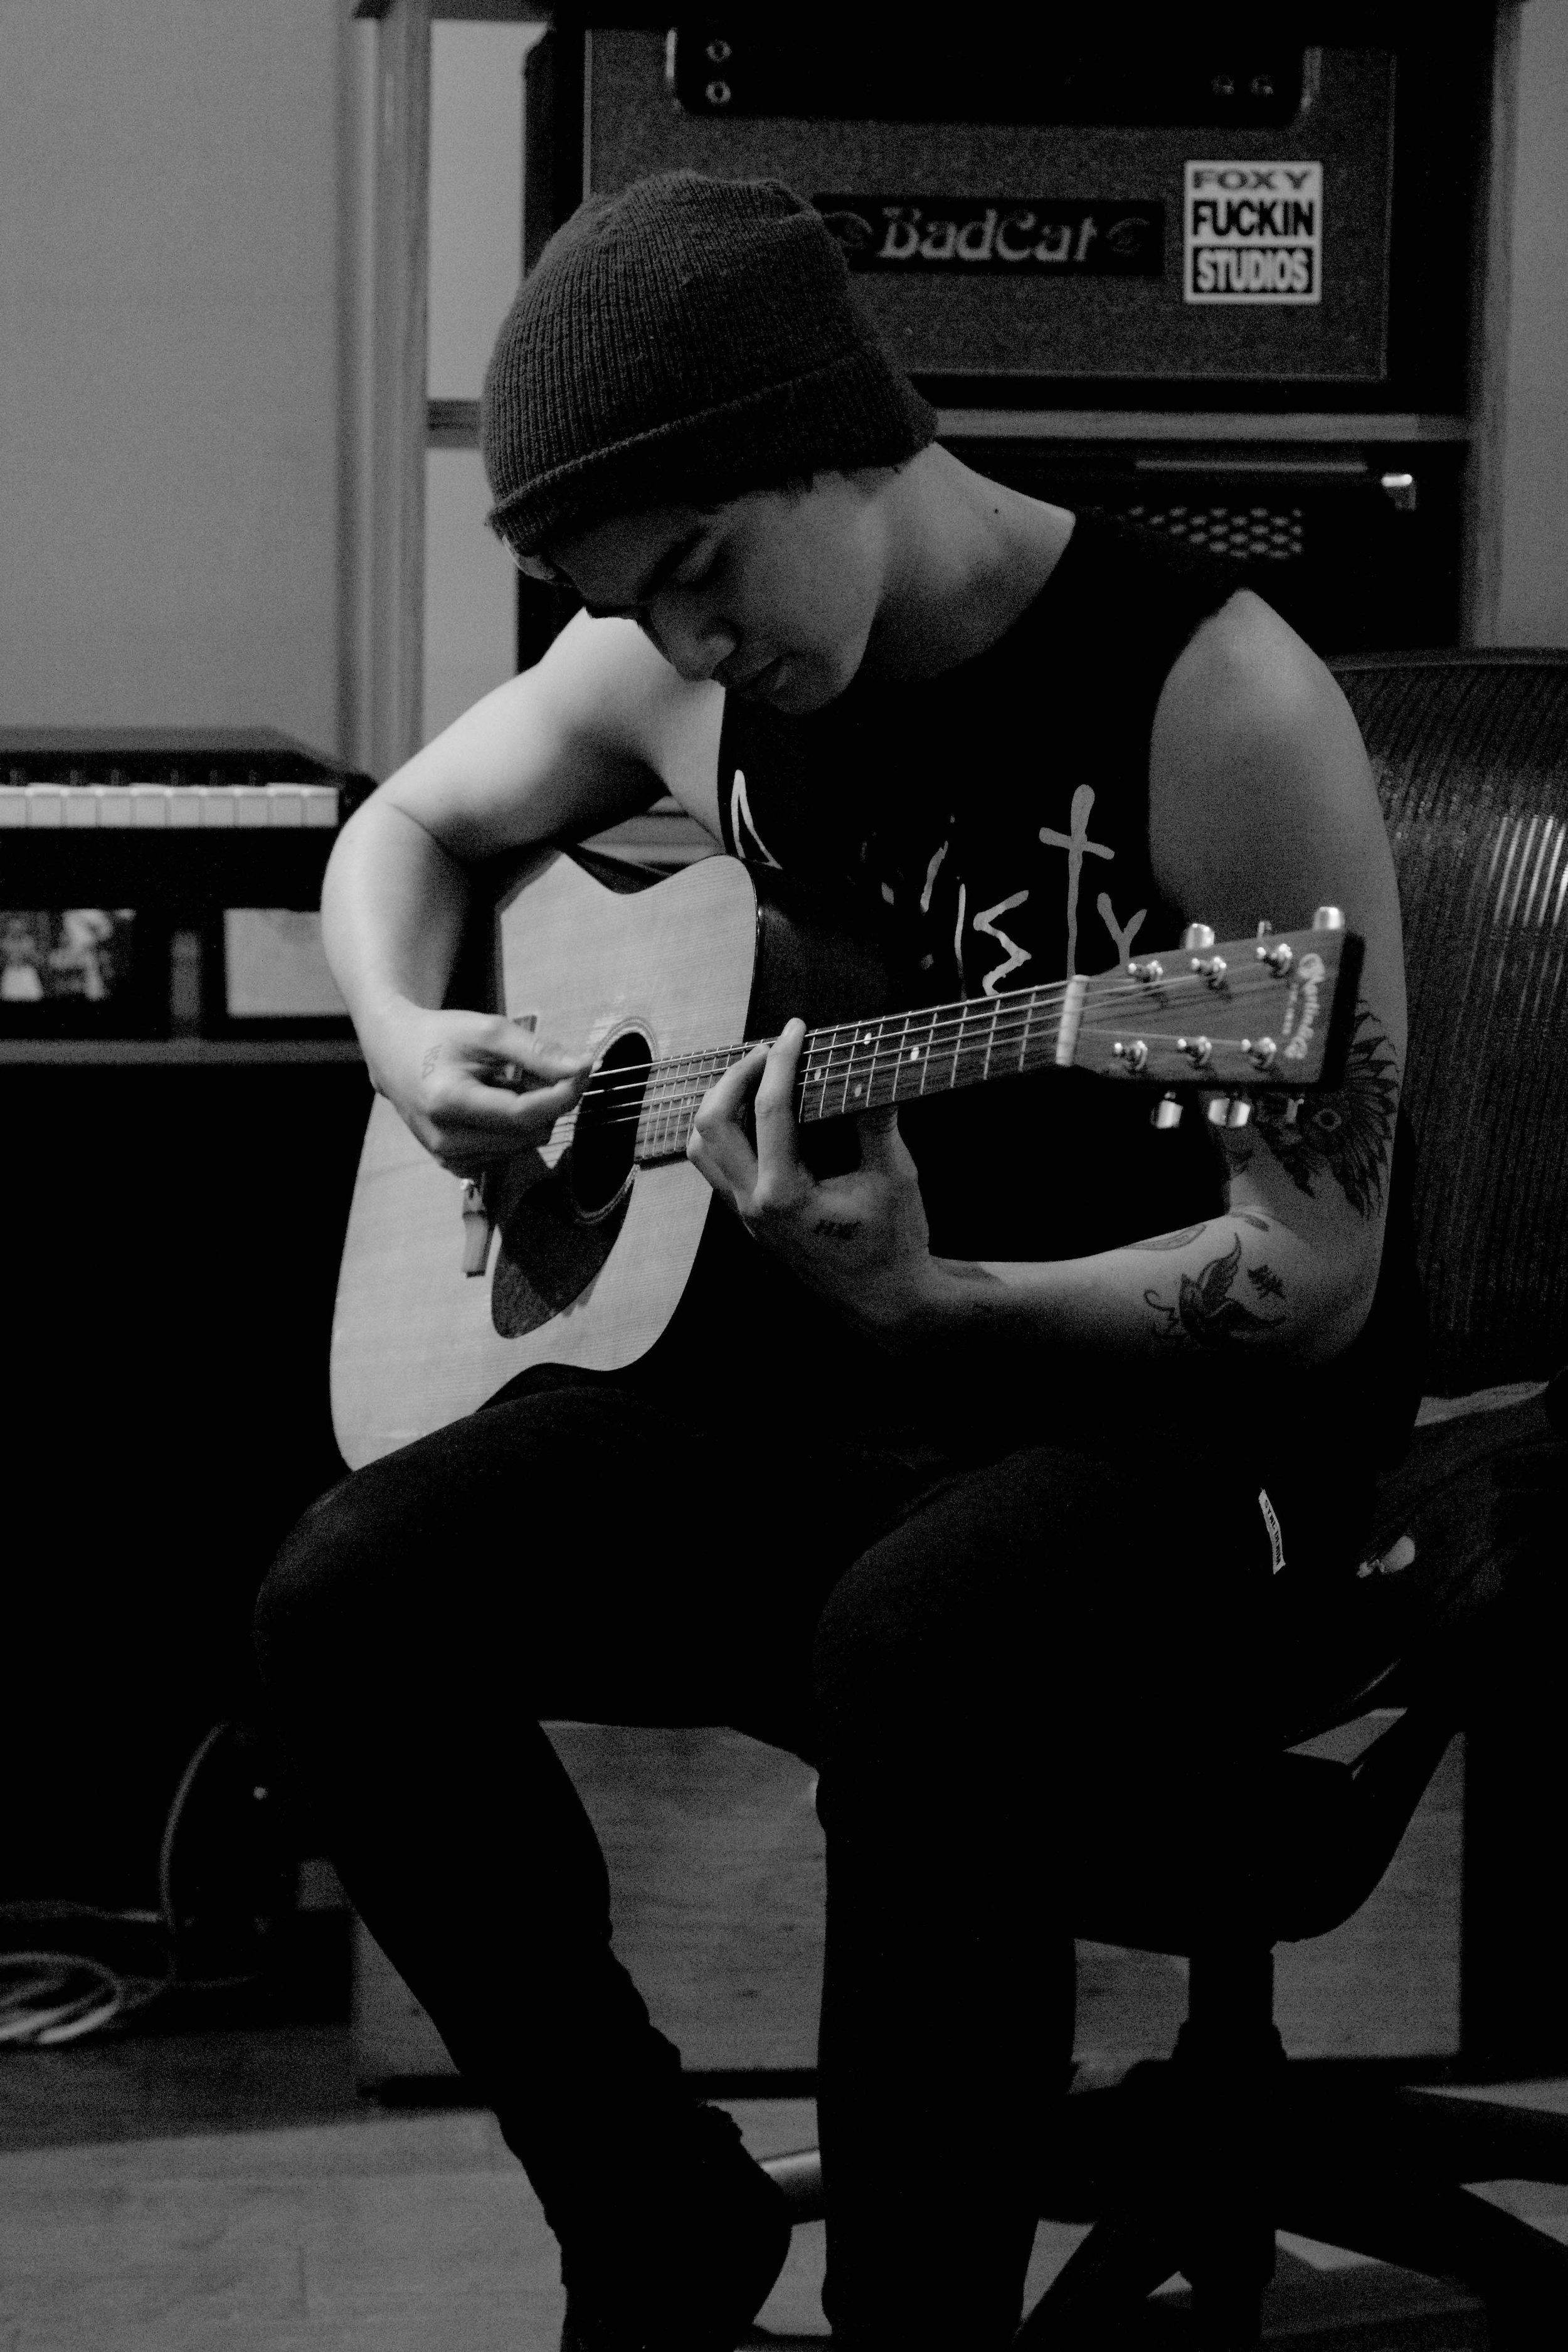  Calum Hood of 5 Seconds of Summer writing for “Sounds Good, Feels Good” at Foxy Studios 